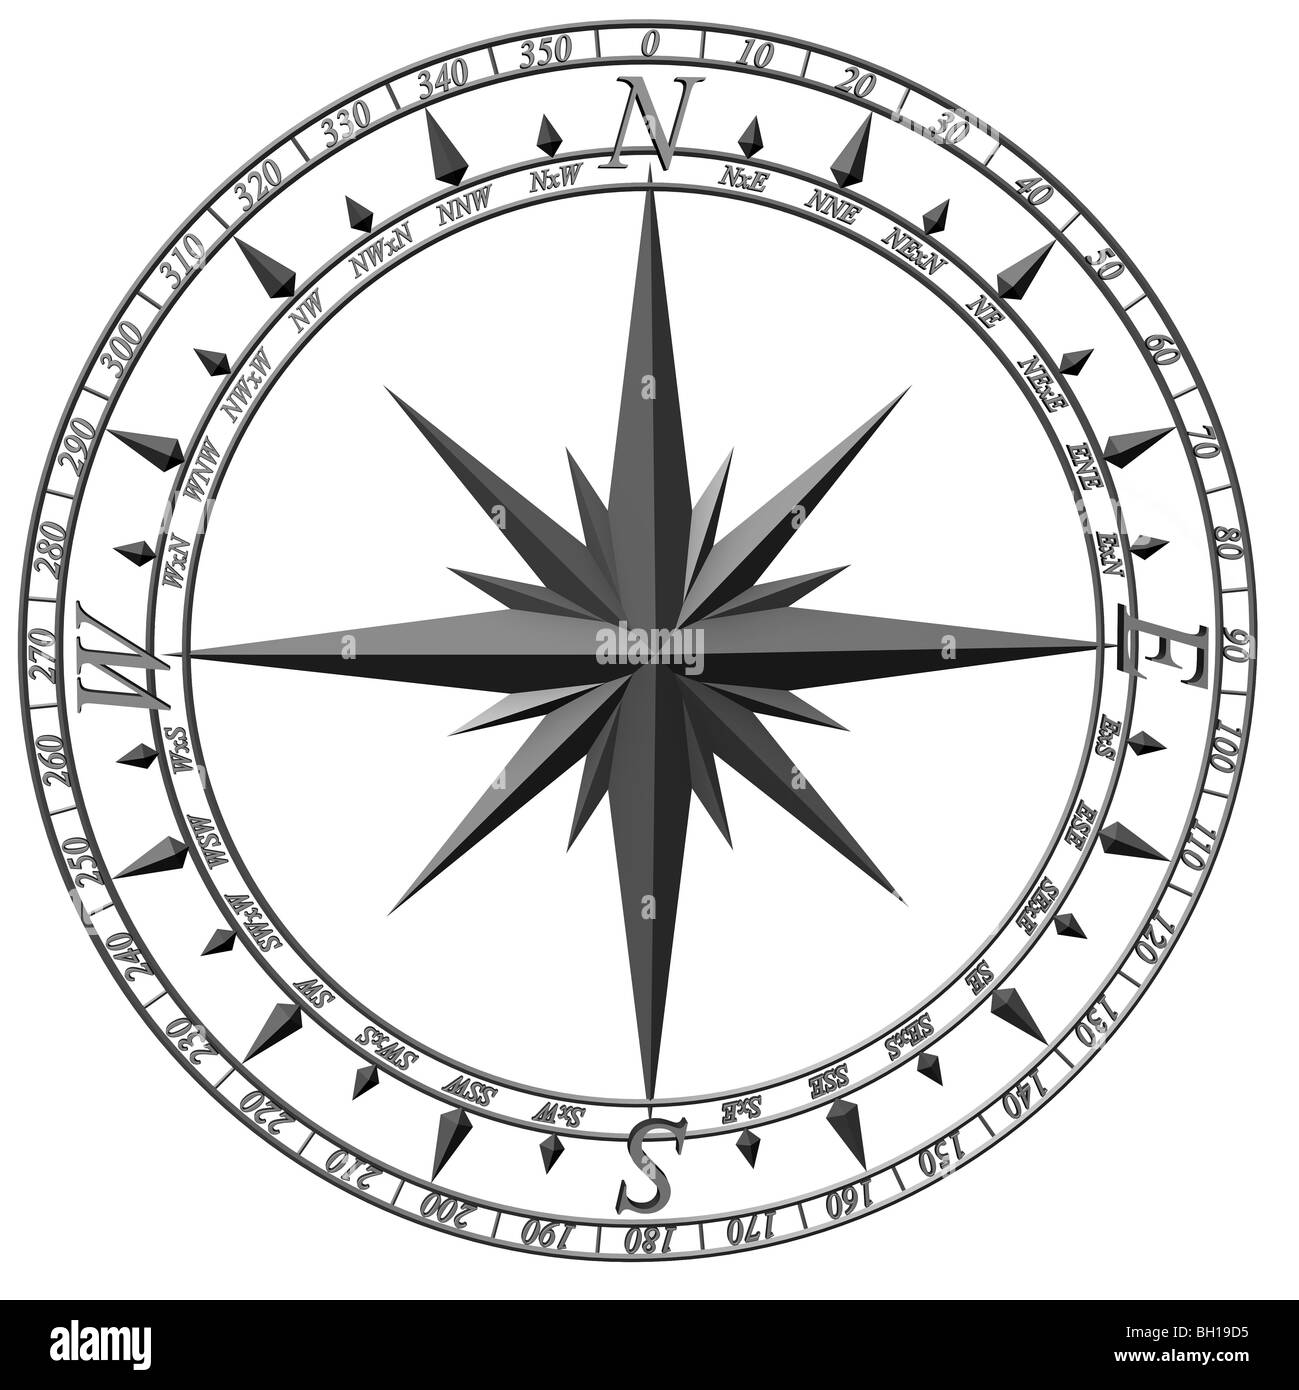 3d illustration of compass rose showing the four cardinal directions, the four intercardinal directions, and eight more divisions. Cut out. Stock Photo